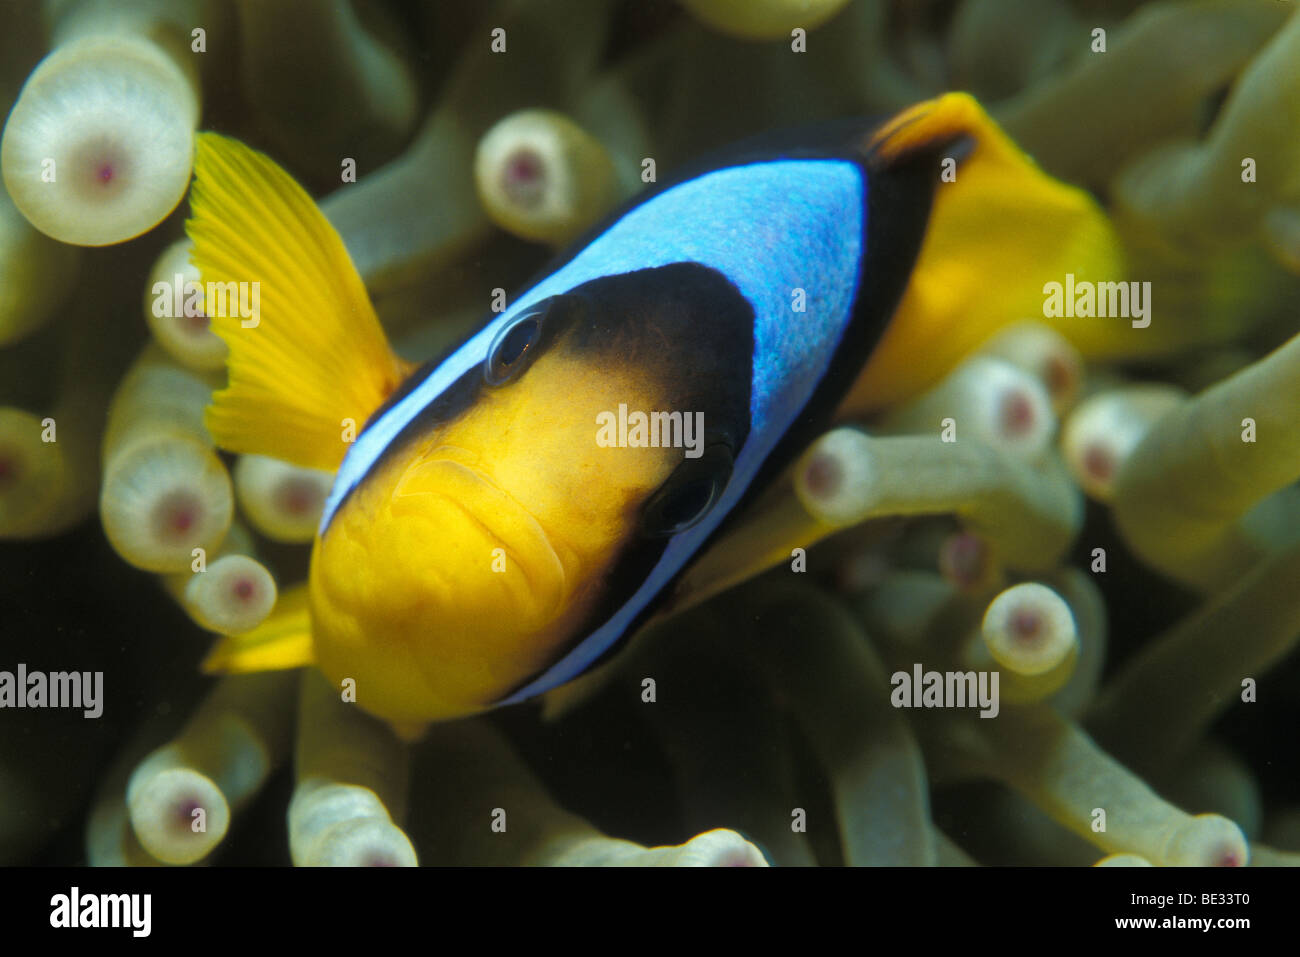 Two-banded Anemonefish in Magnificent Anemone, Amphiprion bicinctus, Heteractis magnifica, Ras Mohammed, Sinai, Red Sea, Egypt Stock Photo